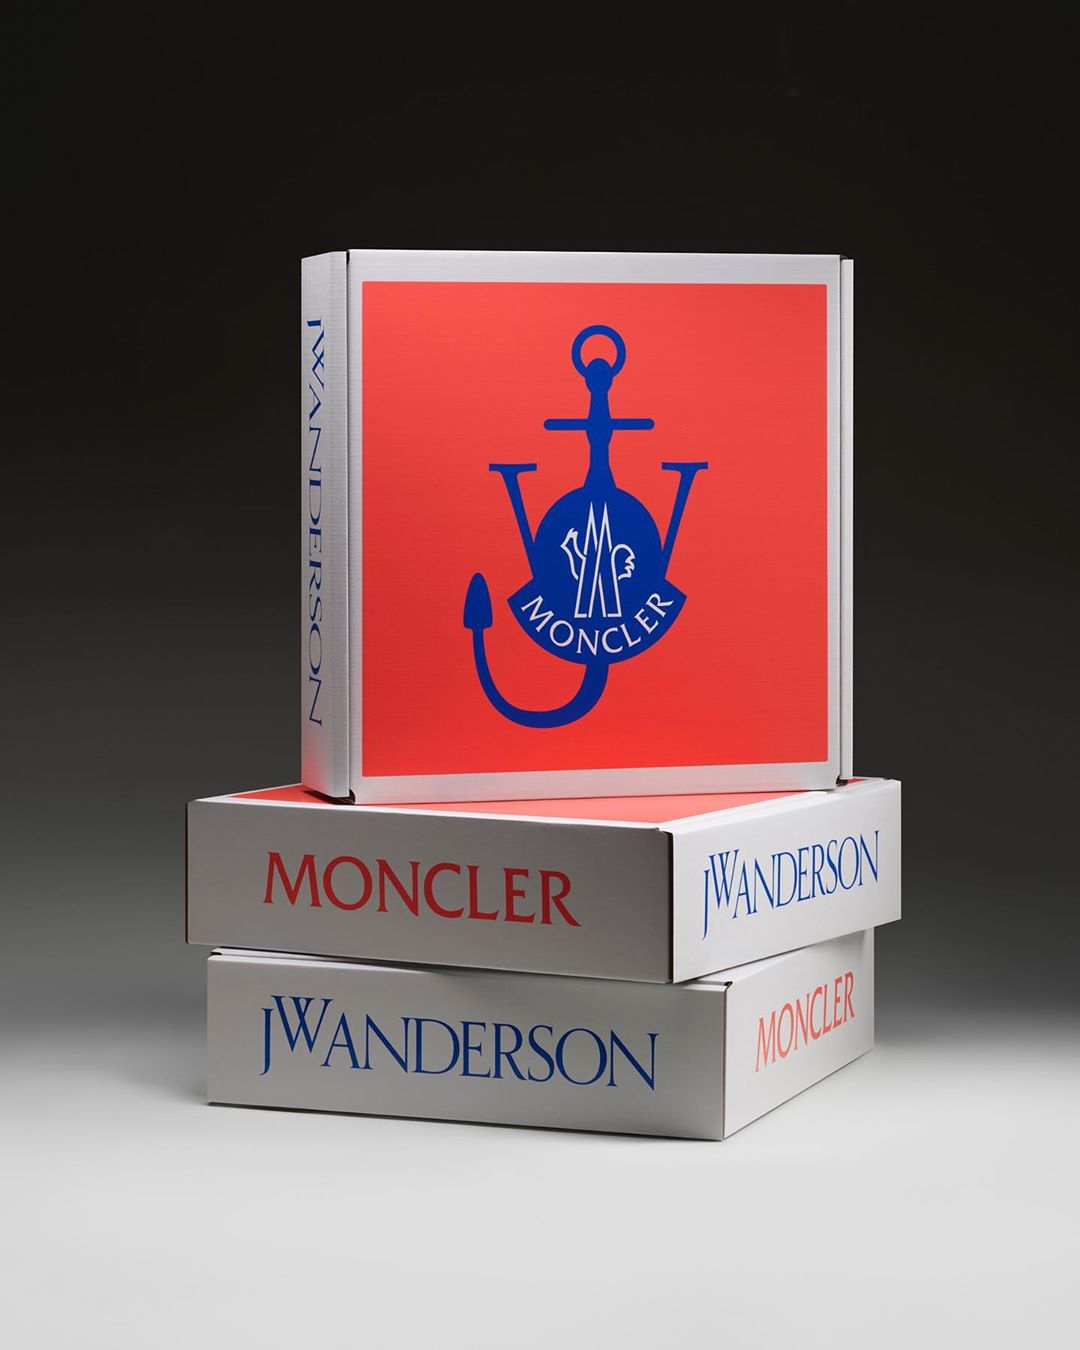 Moncler - Exhibition In A Box.

#MONCLERJWANDERSON brings the gallery experience directly to you offering a unique take on the Private View. @Jonathan.Anderson curated a limited edition archive for hi...